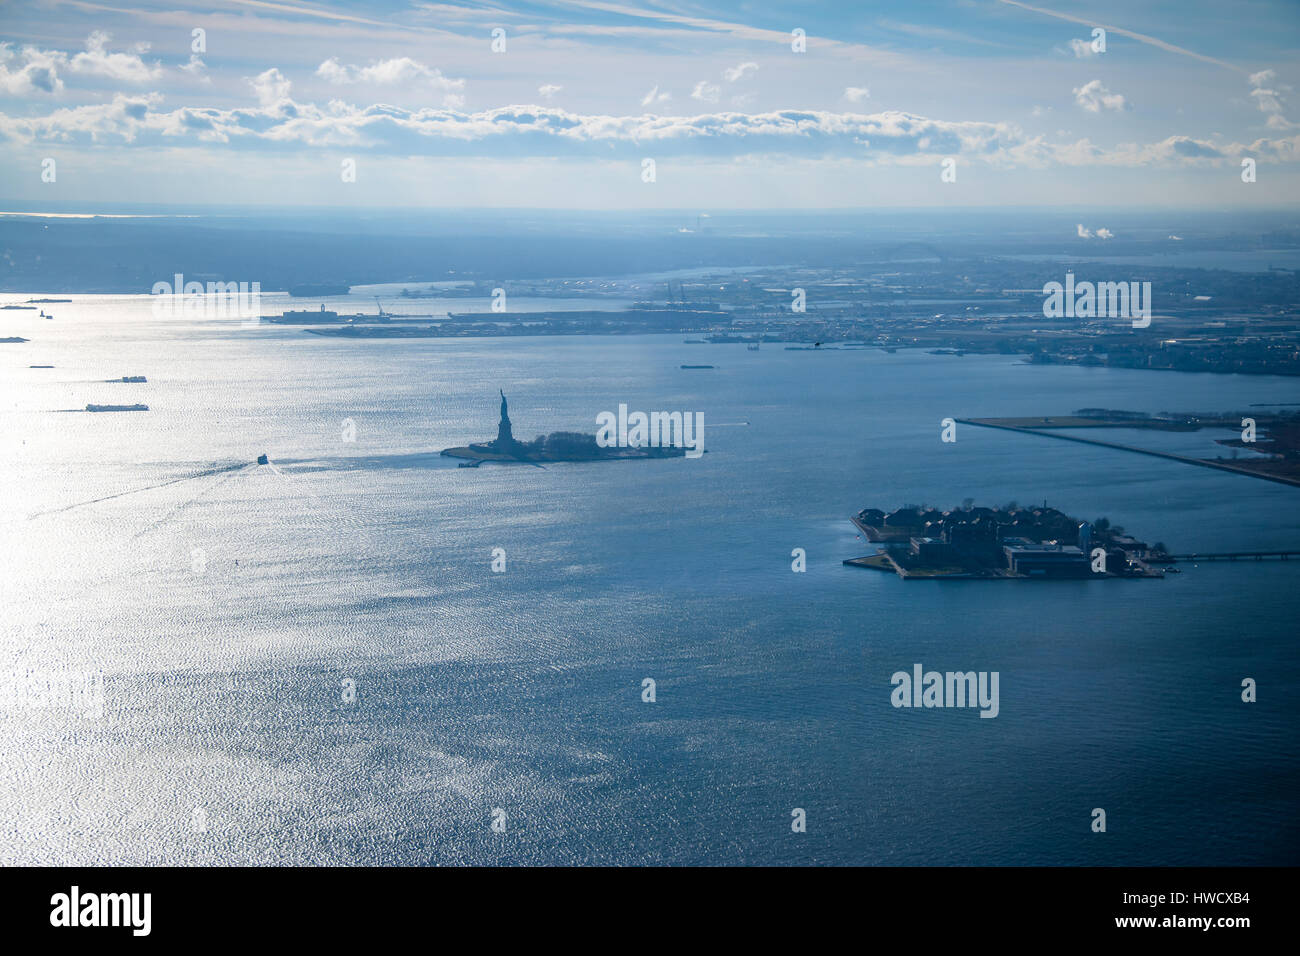 Aerial view of Upper New York Bay with Liberty Island and Liberty Statue - New York, USA Stock Photo